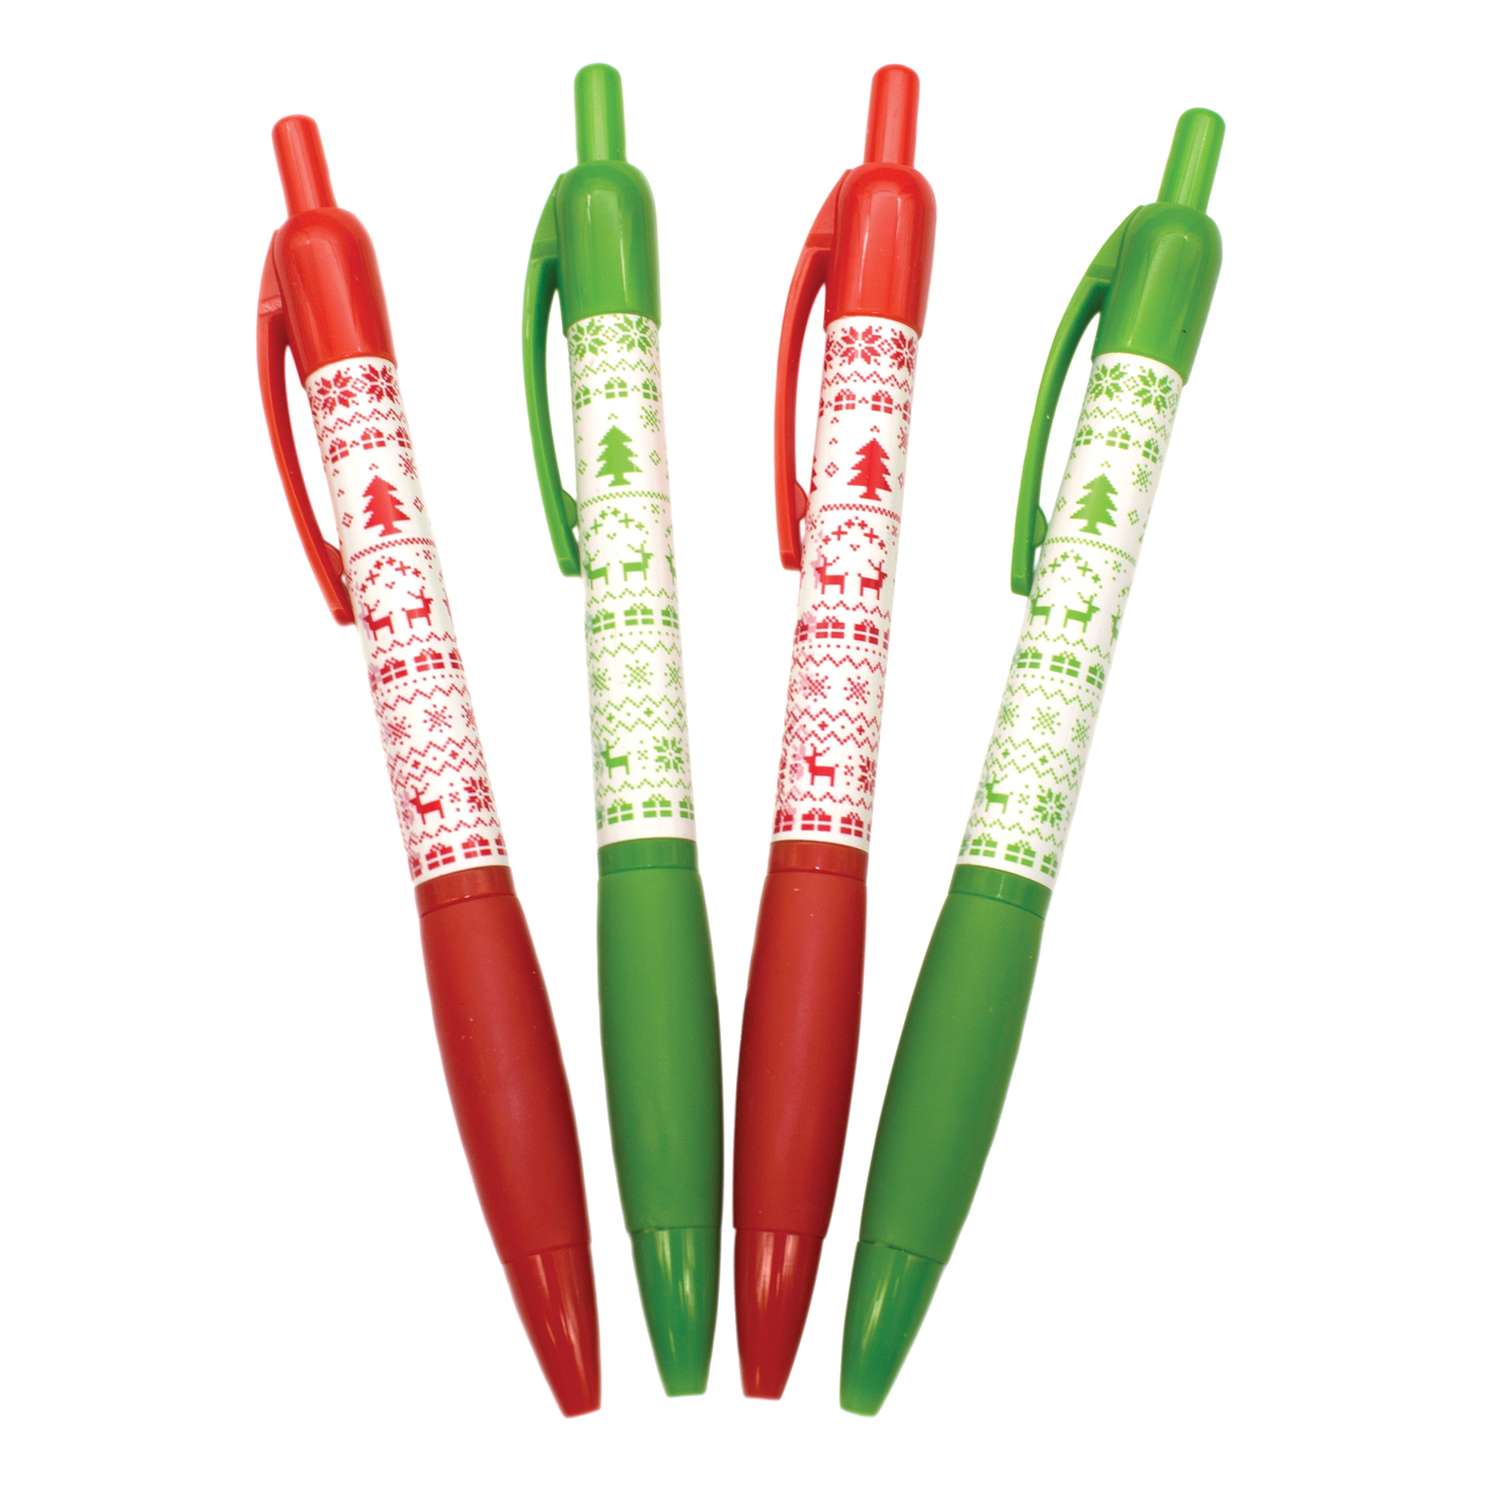 Scentco Black Candy Cane Pen, Pack of 4